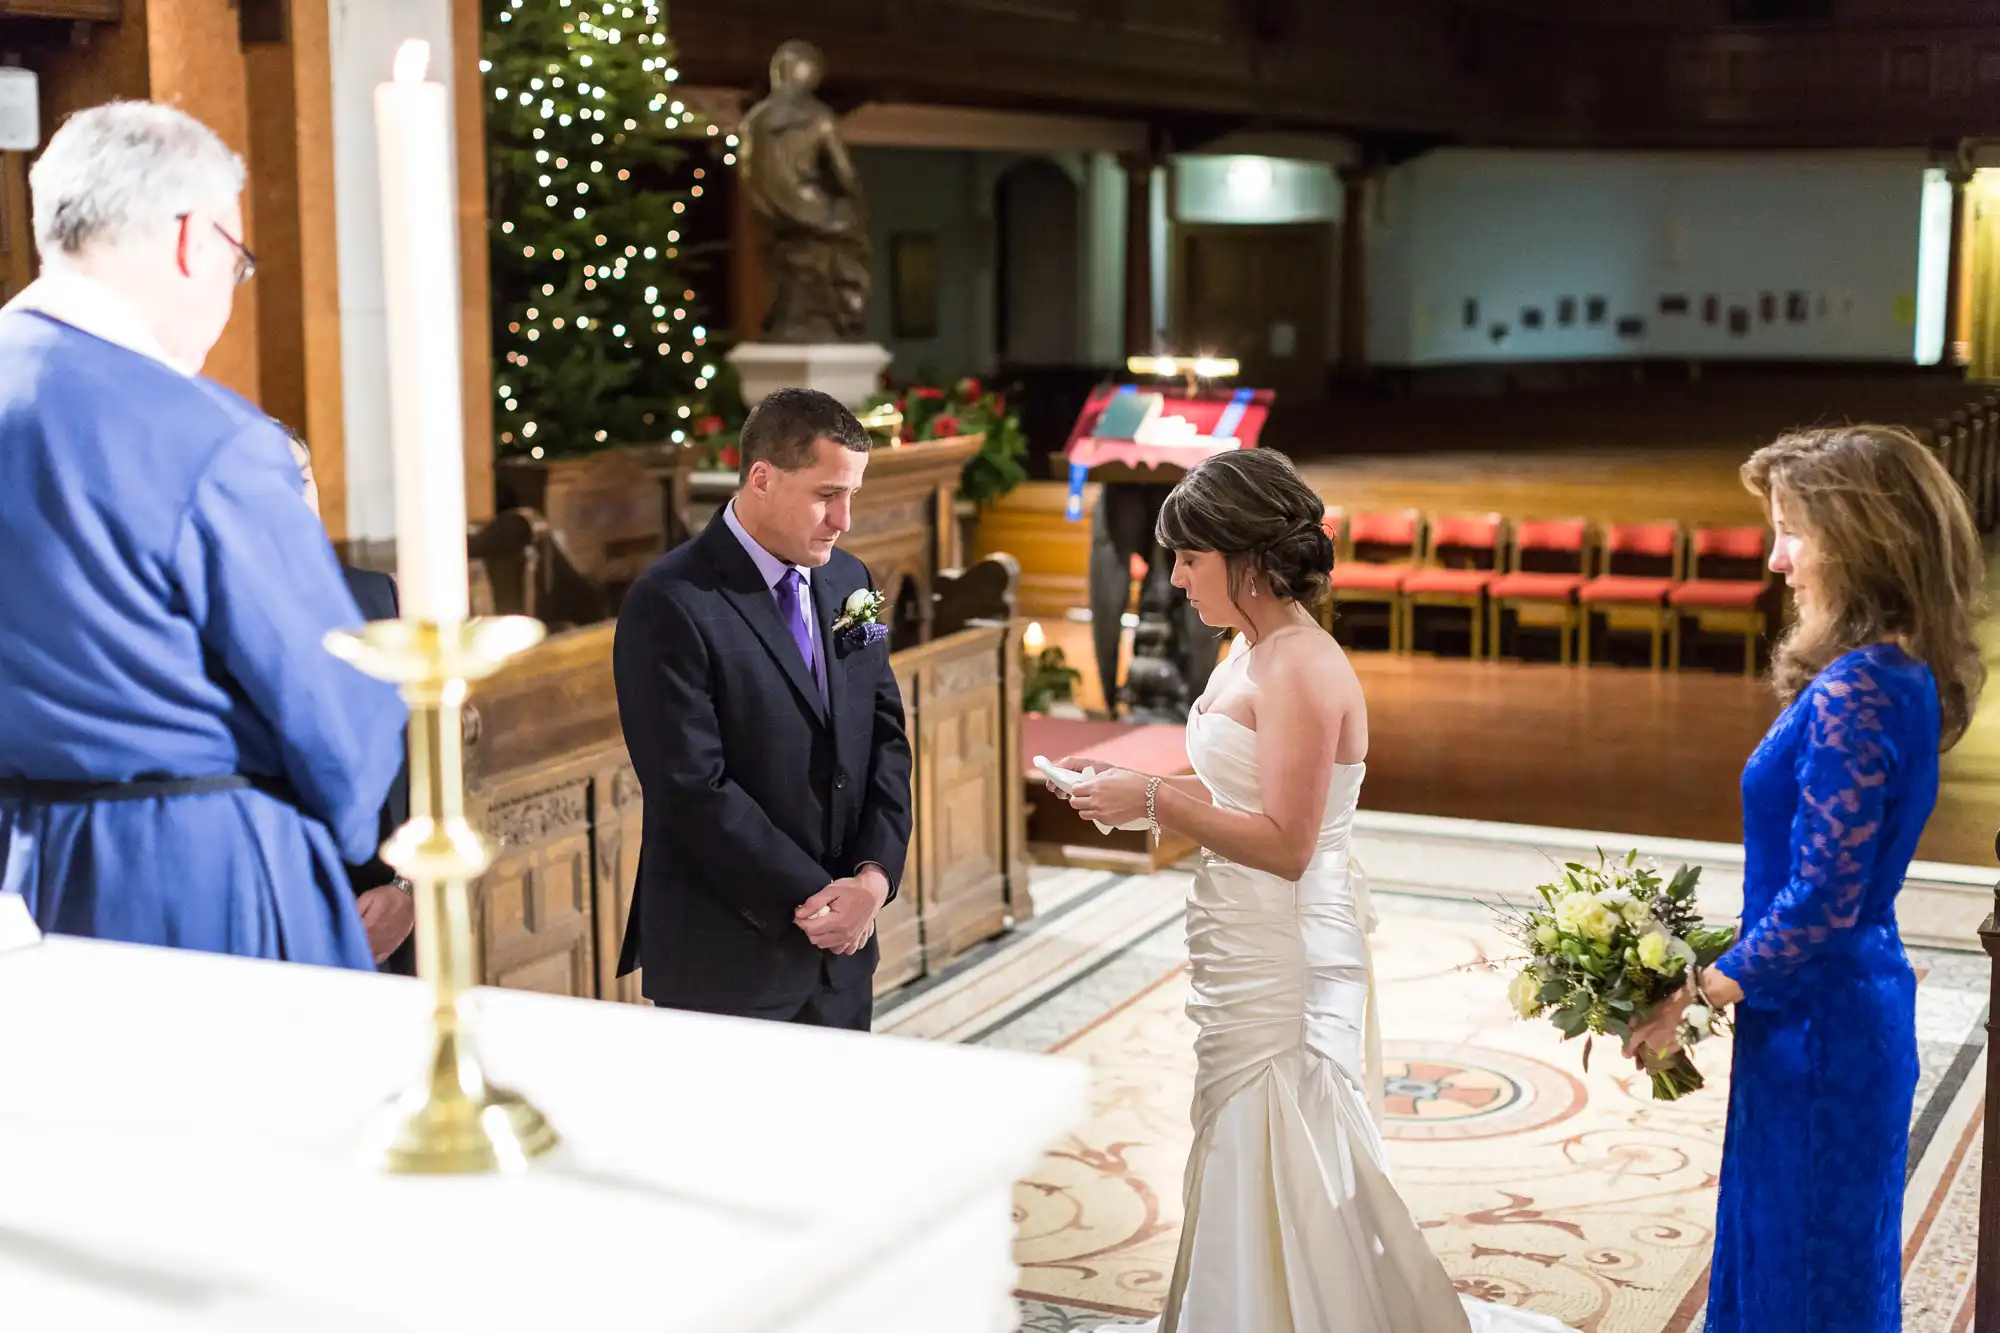 A bride and groom exchanging vows in a church, with an officiant and another woman present, during a wedding ceremony.